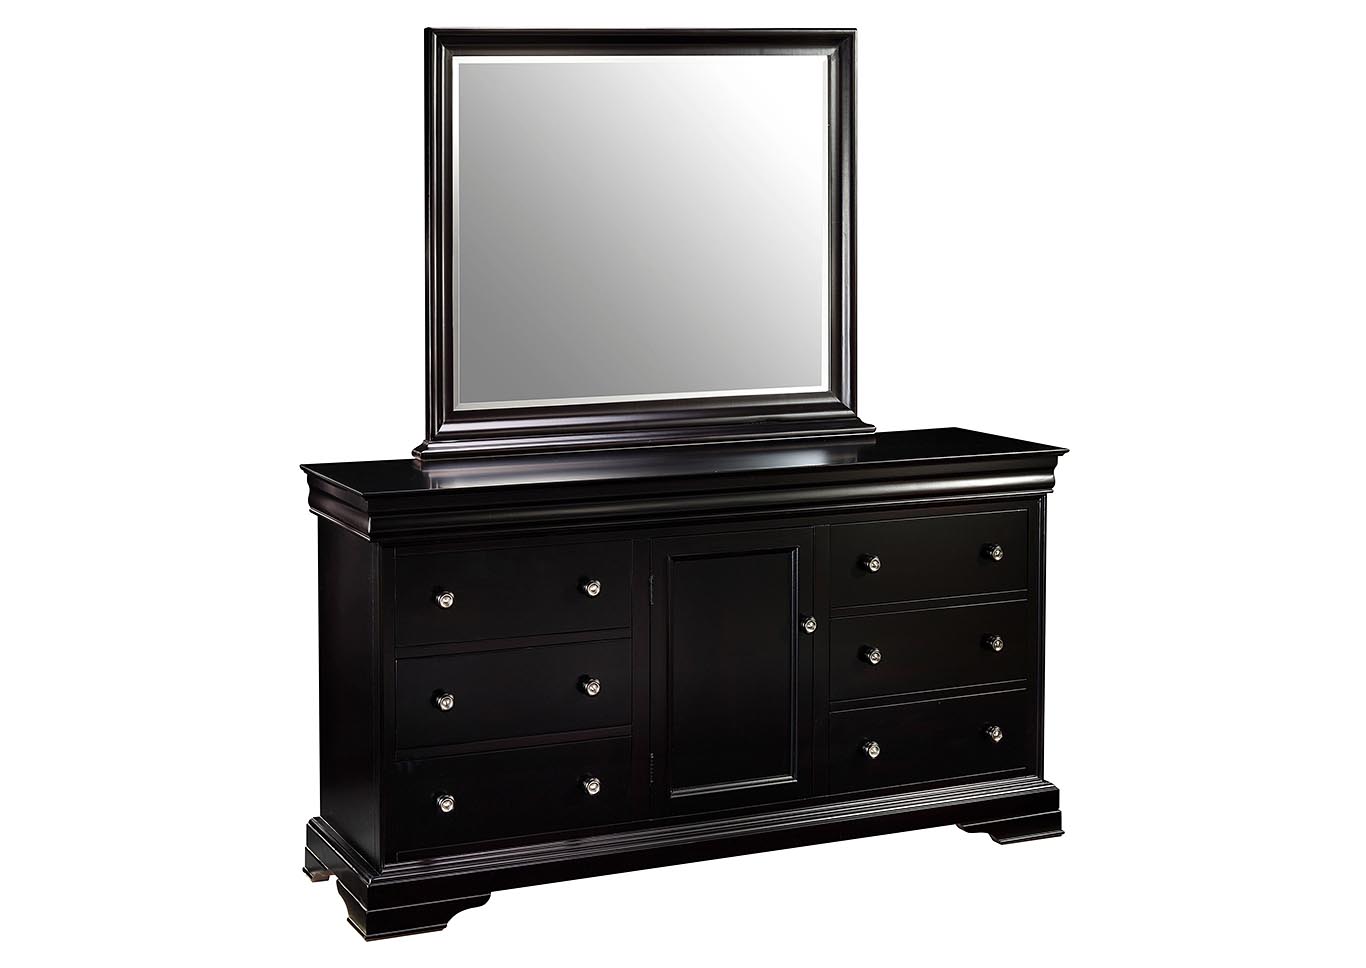 Belle Rose Black Cherry Full Bed w/Dresser and Mirror,New Classic